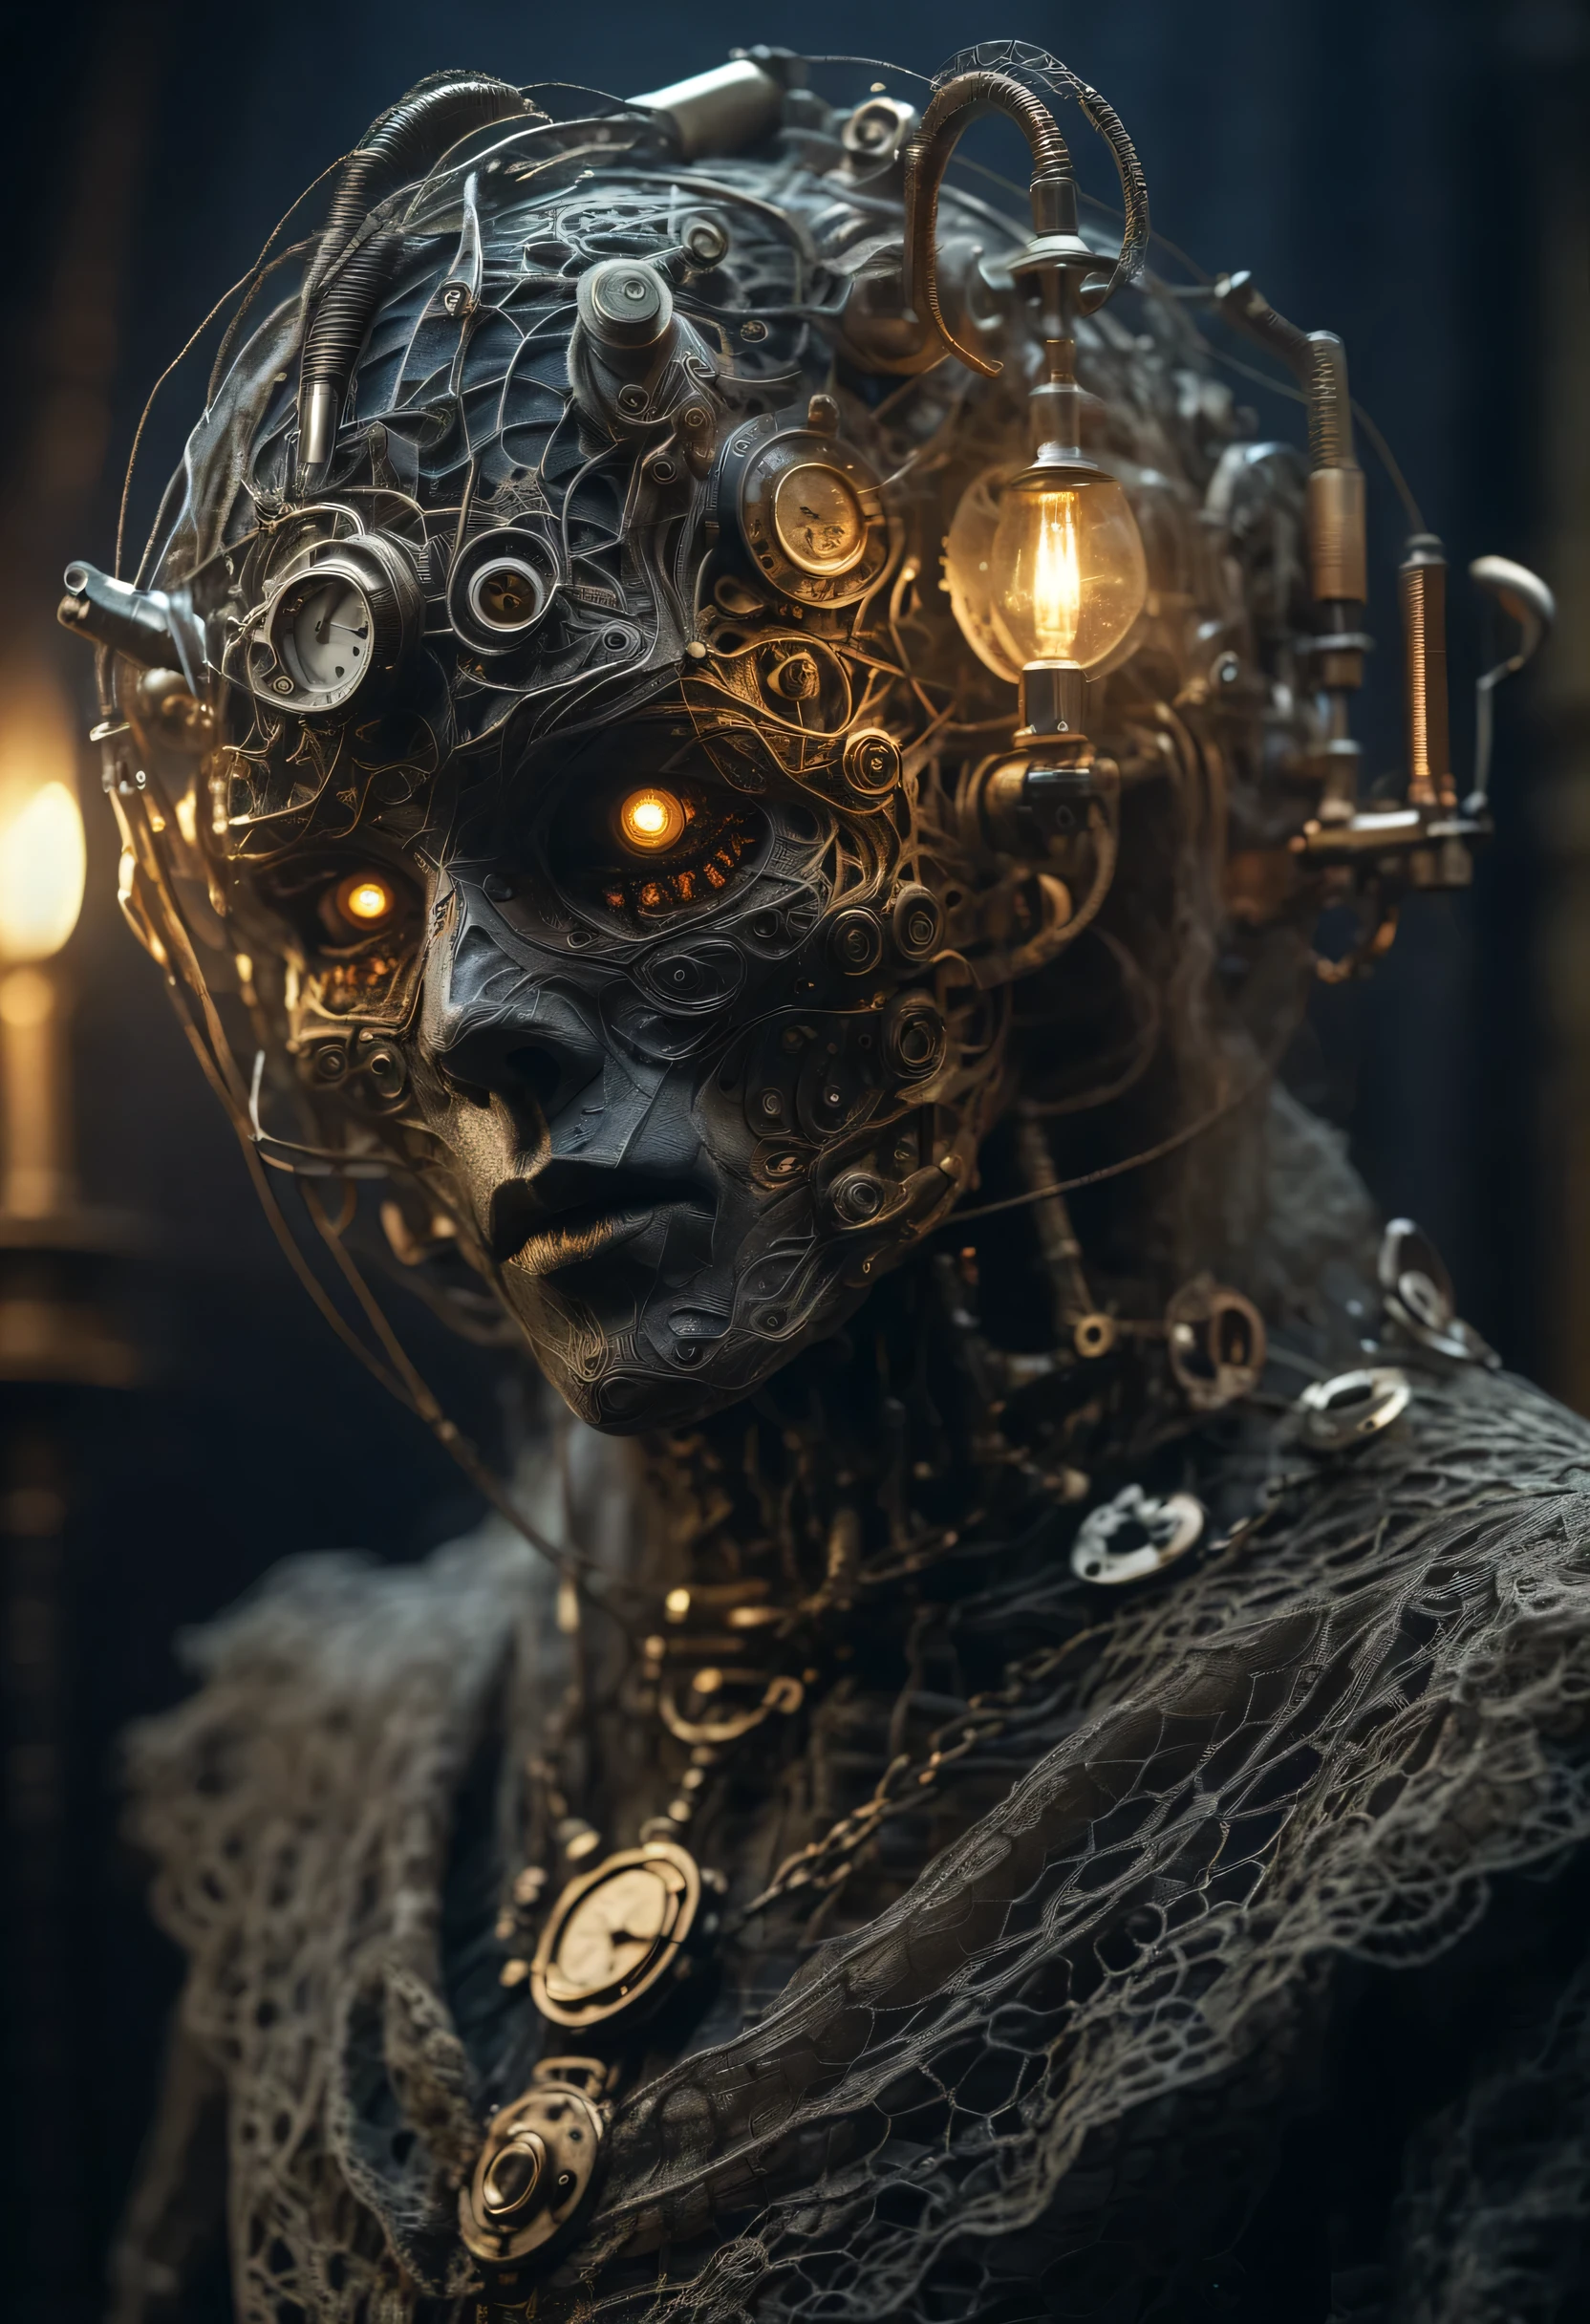 Mechanical puppets，whole body，eyes and face, Complex mechanisms, metallic feel, dark and mysterious atmosphere, a haunting reality, dramatic lighting, Aged and weathered appearance, Steampunk elements, Weird and surreal atmosphere, intricate lace pattern, film composition, exquisite craft, Gothic aesthetics, unforgettably beautiful+,[high dynamic range],[fear],[concept artist],[sharp focus],[professional],[bright colors],[Bokeh]